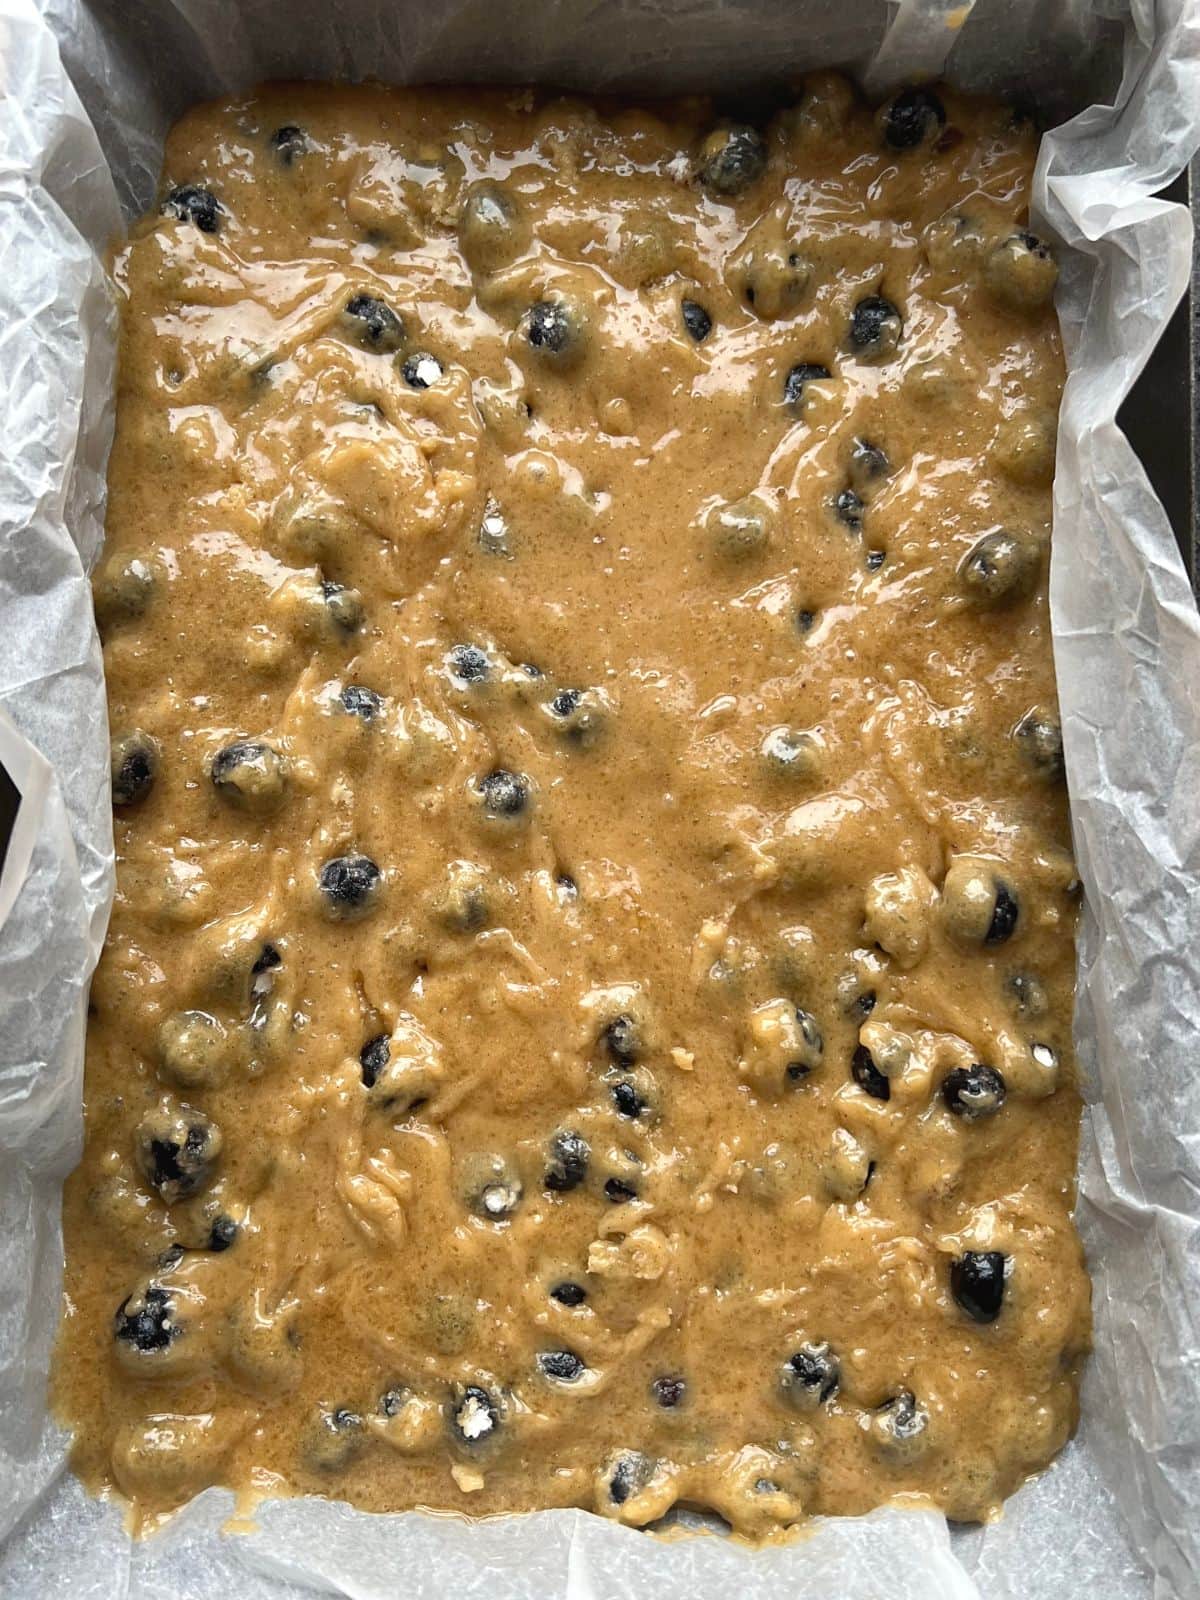 Blueberry batter in a lined baking pan.